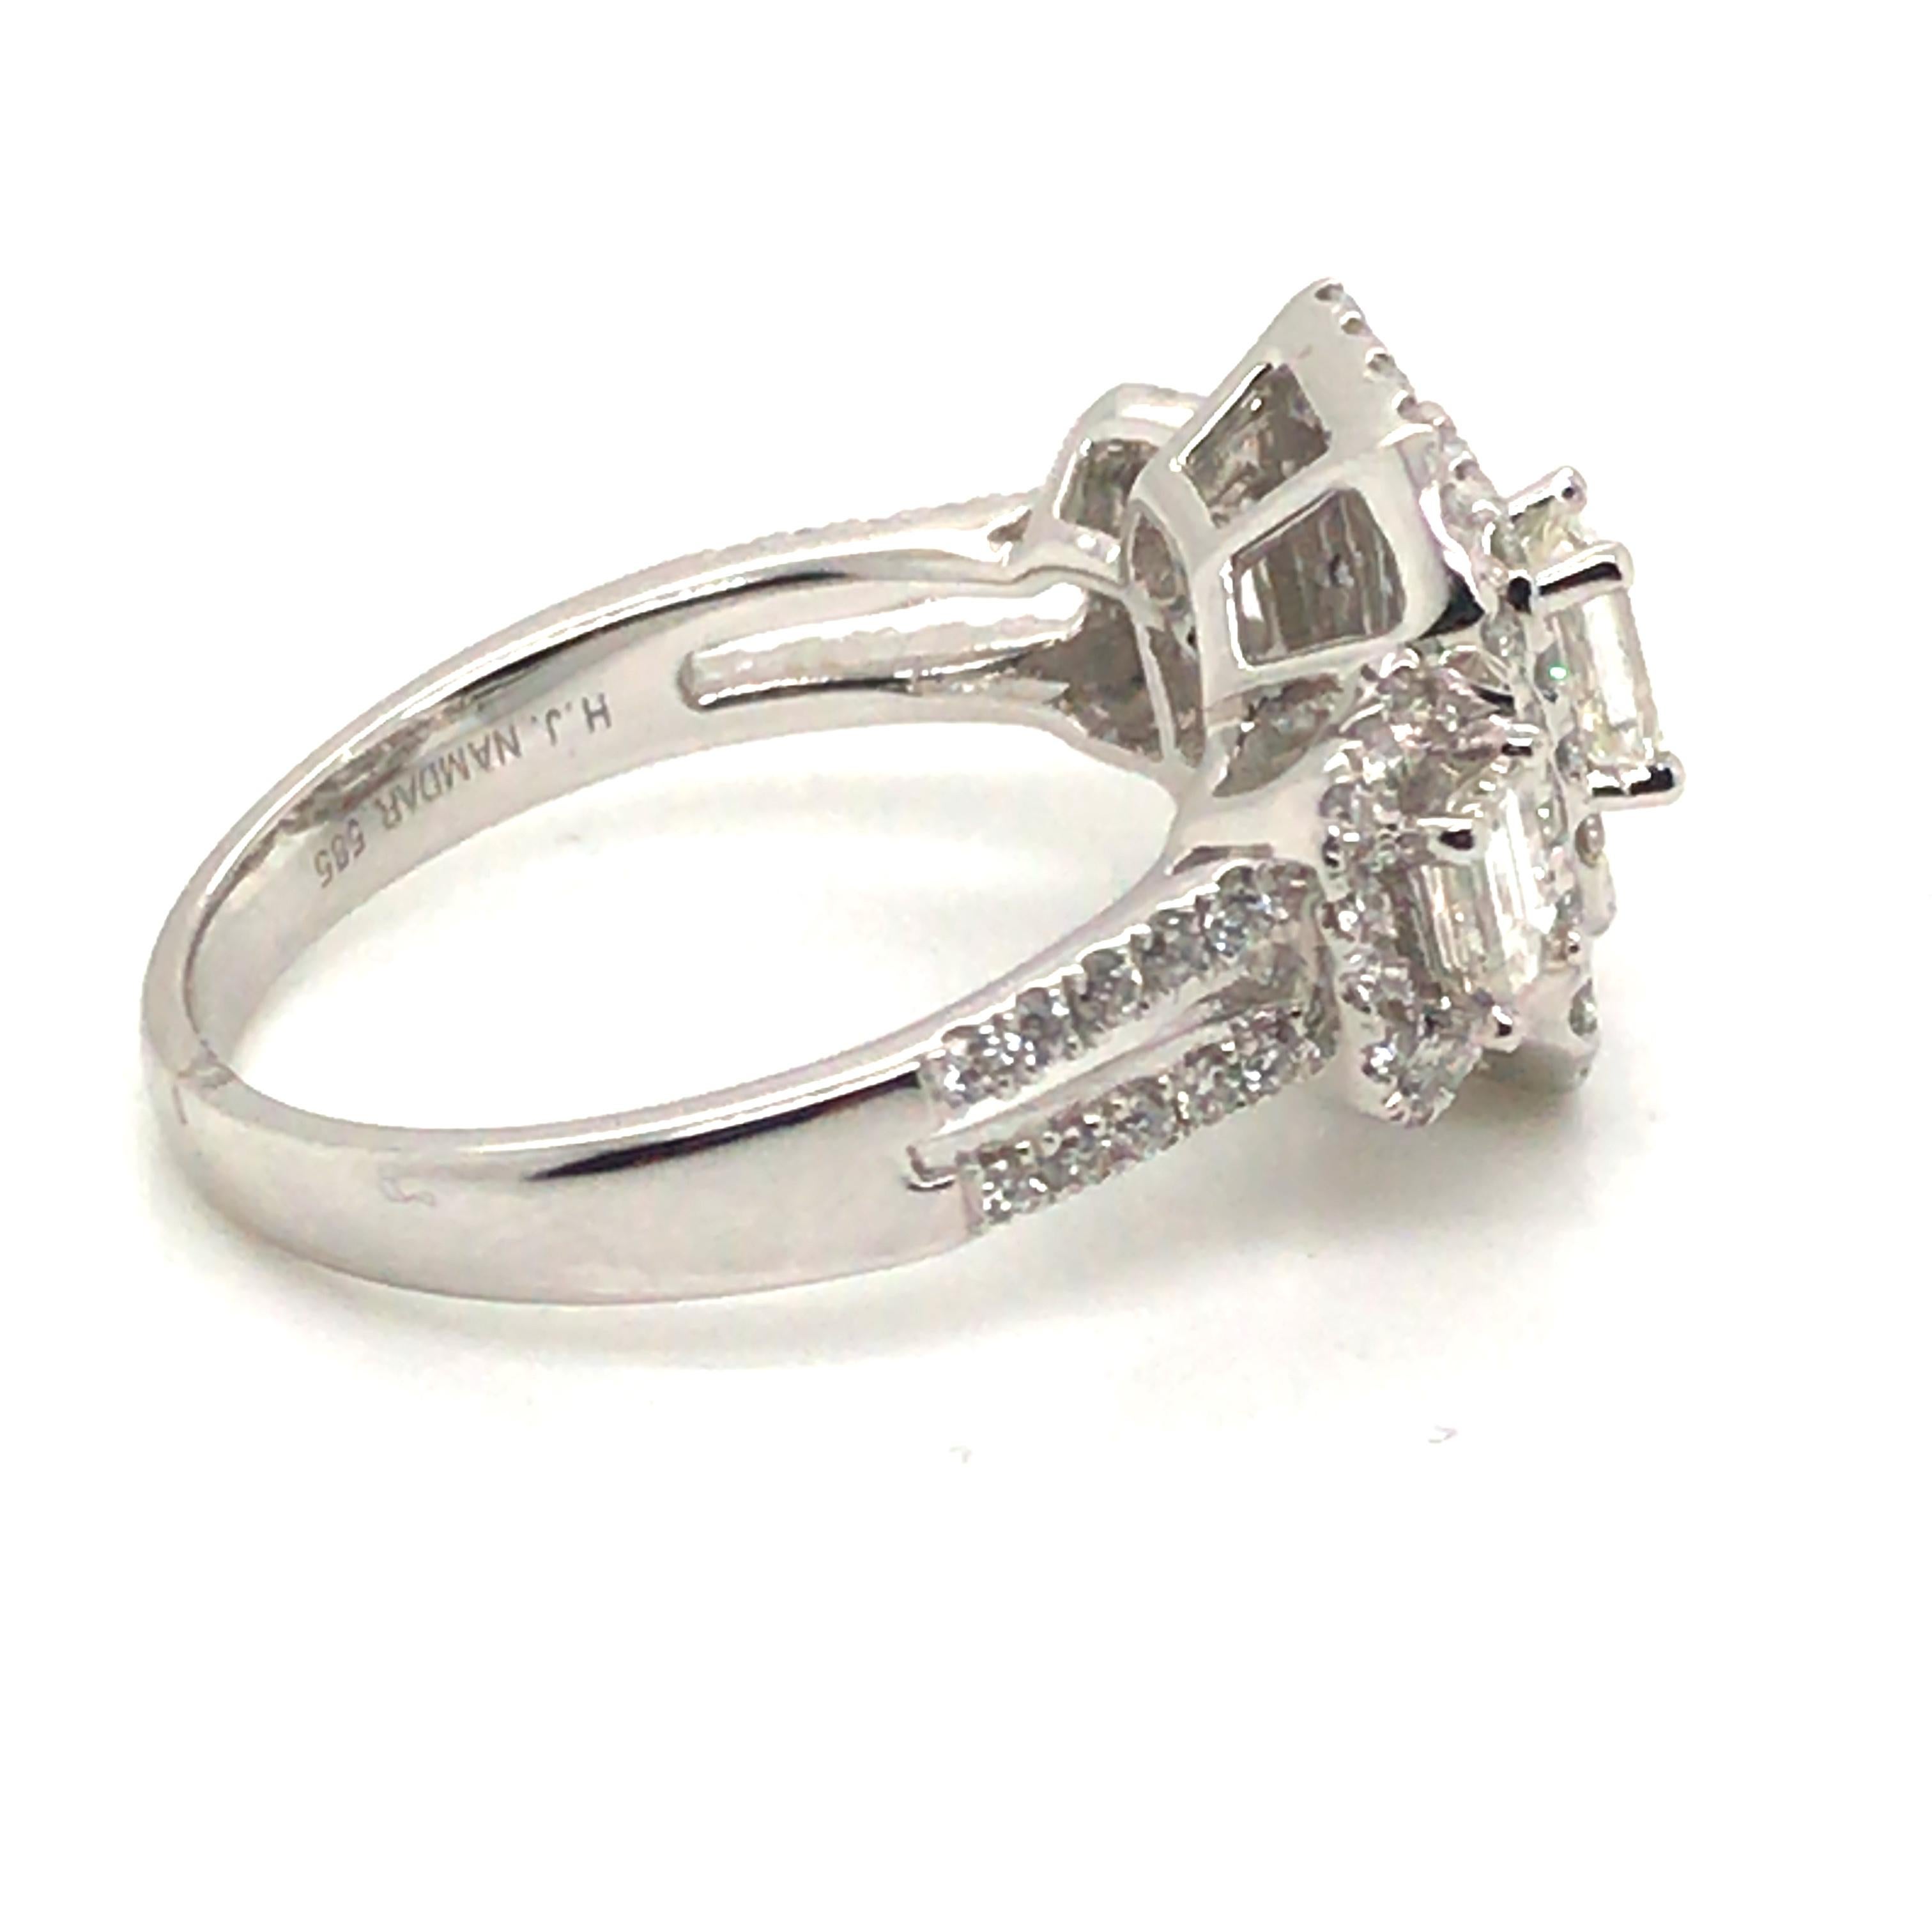 Check out our new 1.36 CT Cluster Style Round & Baguette Diamond Ring with 14 Karat White Gold
Round-Cut Diamond Weight: 0.74 Carats
Emerald-Cut Diamond Weight: 0.28 Carats
Baguette-Cut Diamond Weight: 0.34 Carats

Clarity Grade: SI1
Color Grade: